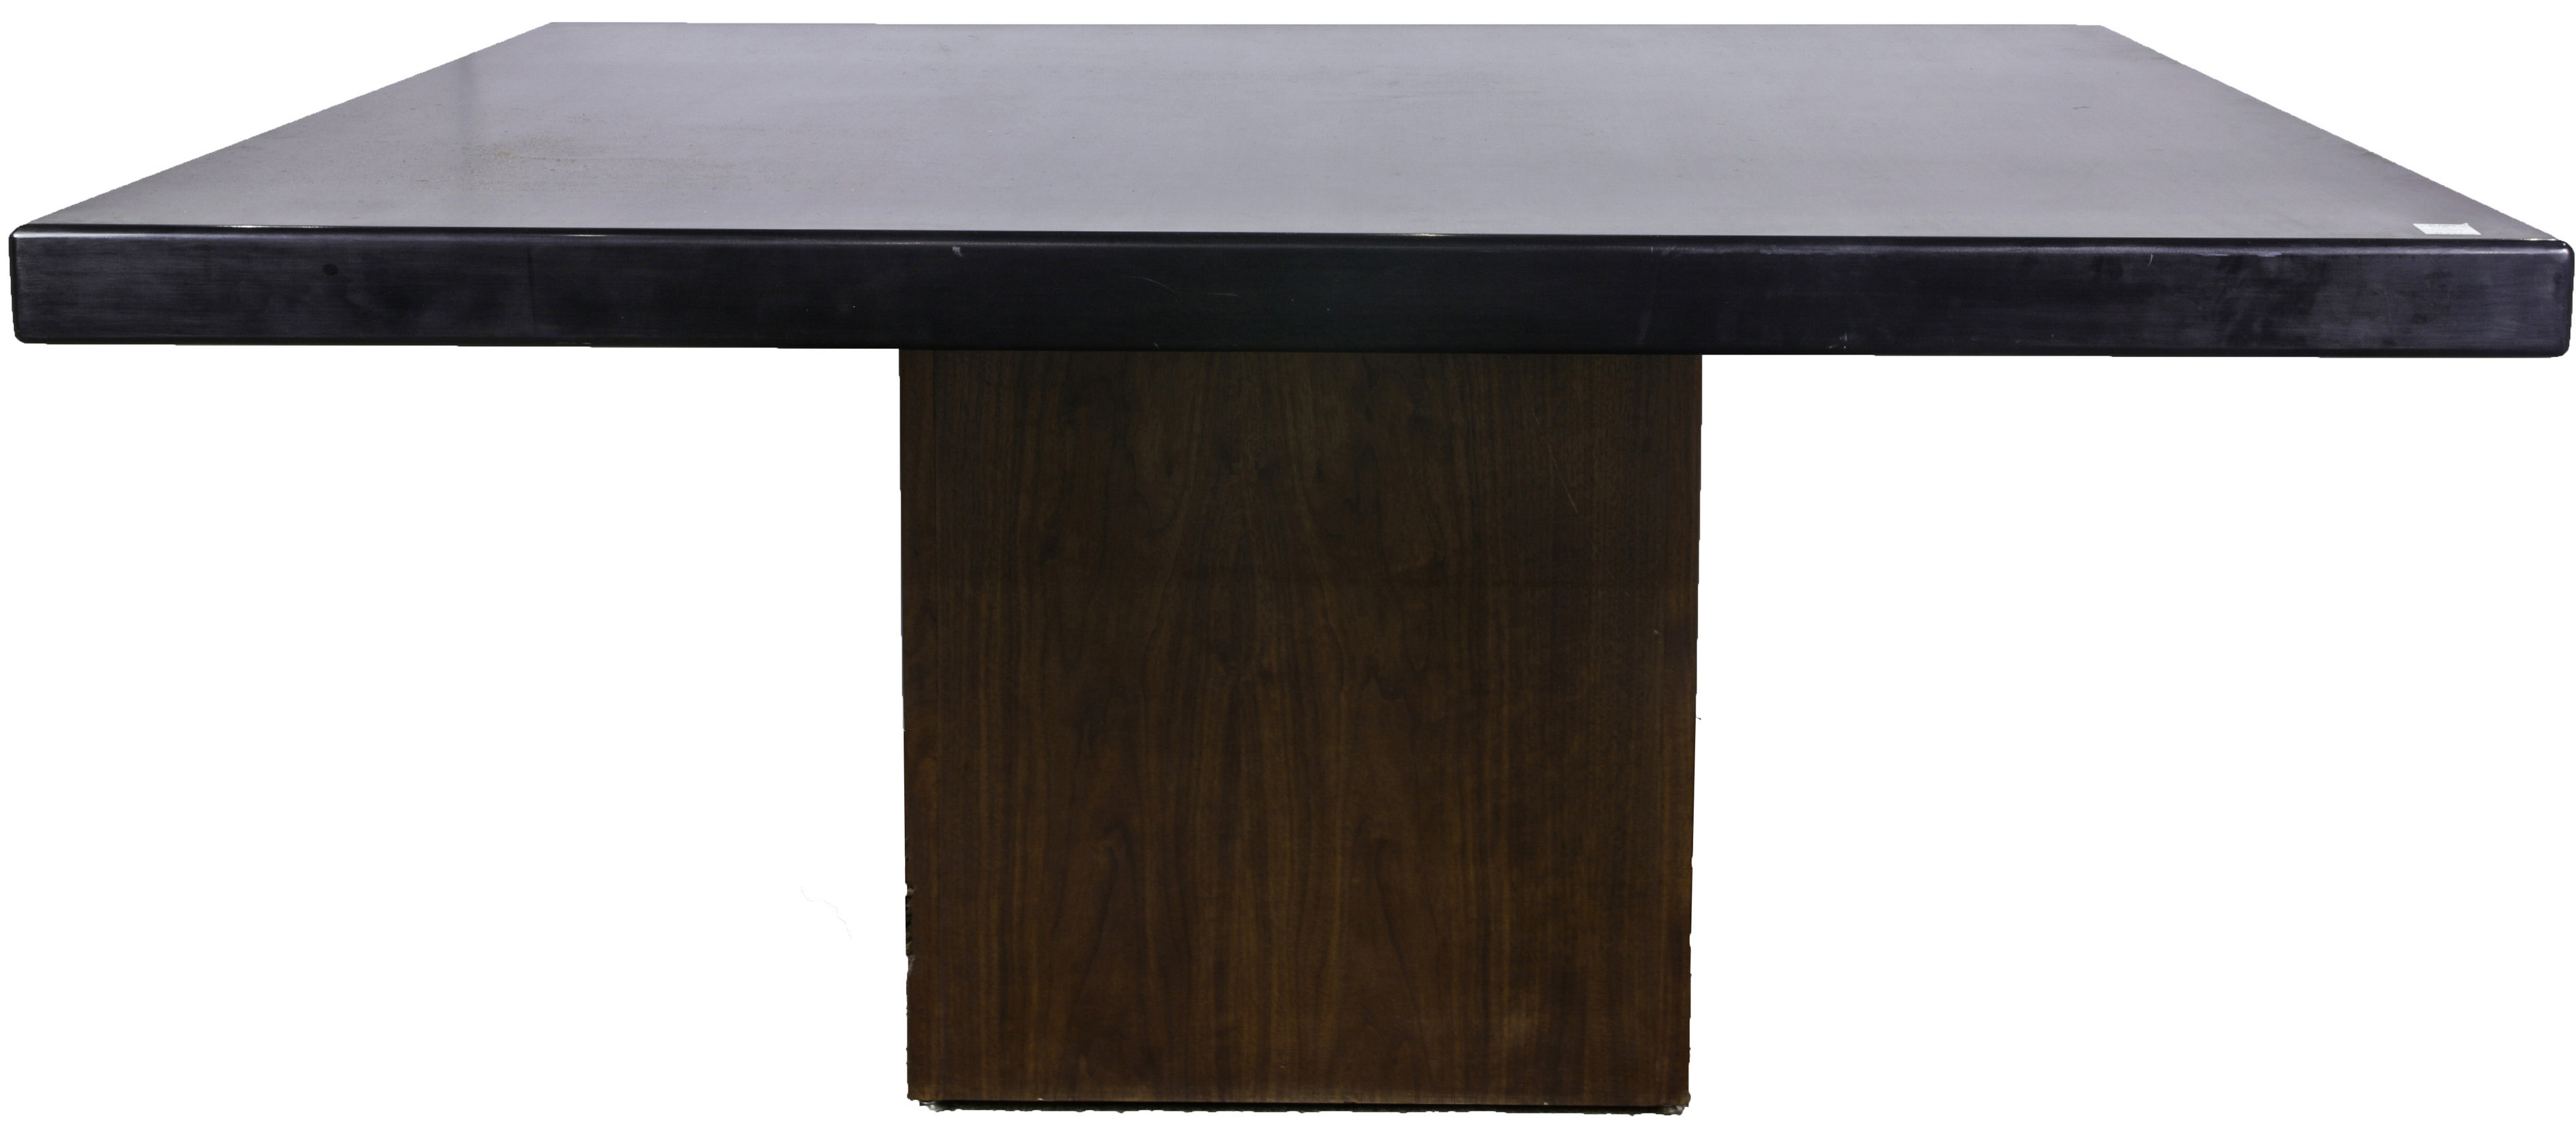 A CONTEMPORARY DINING TABLE A Contemporary 3a4f77